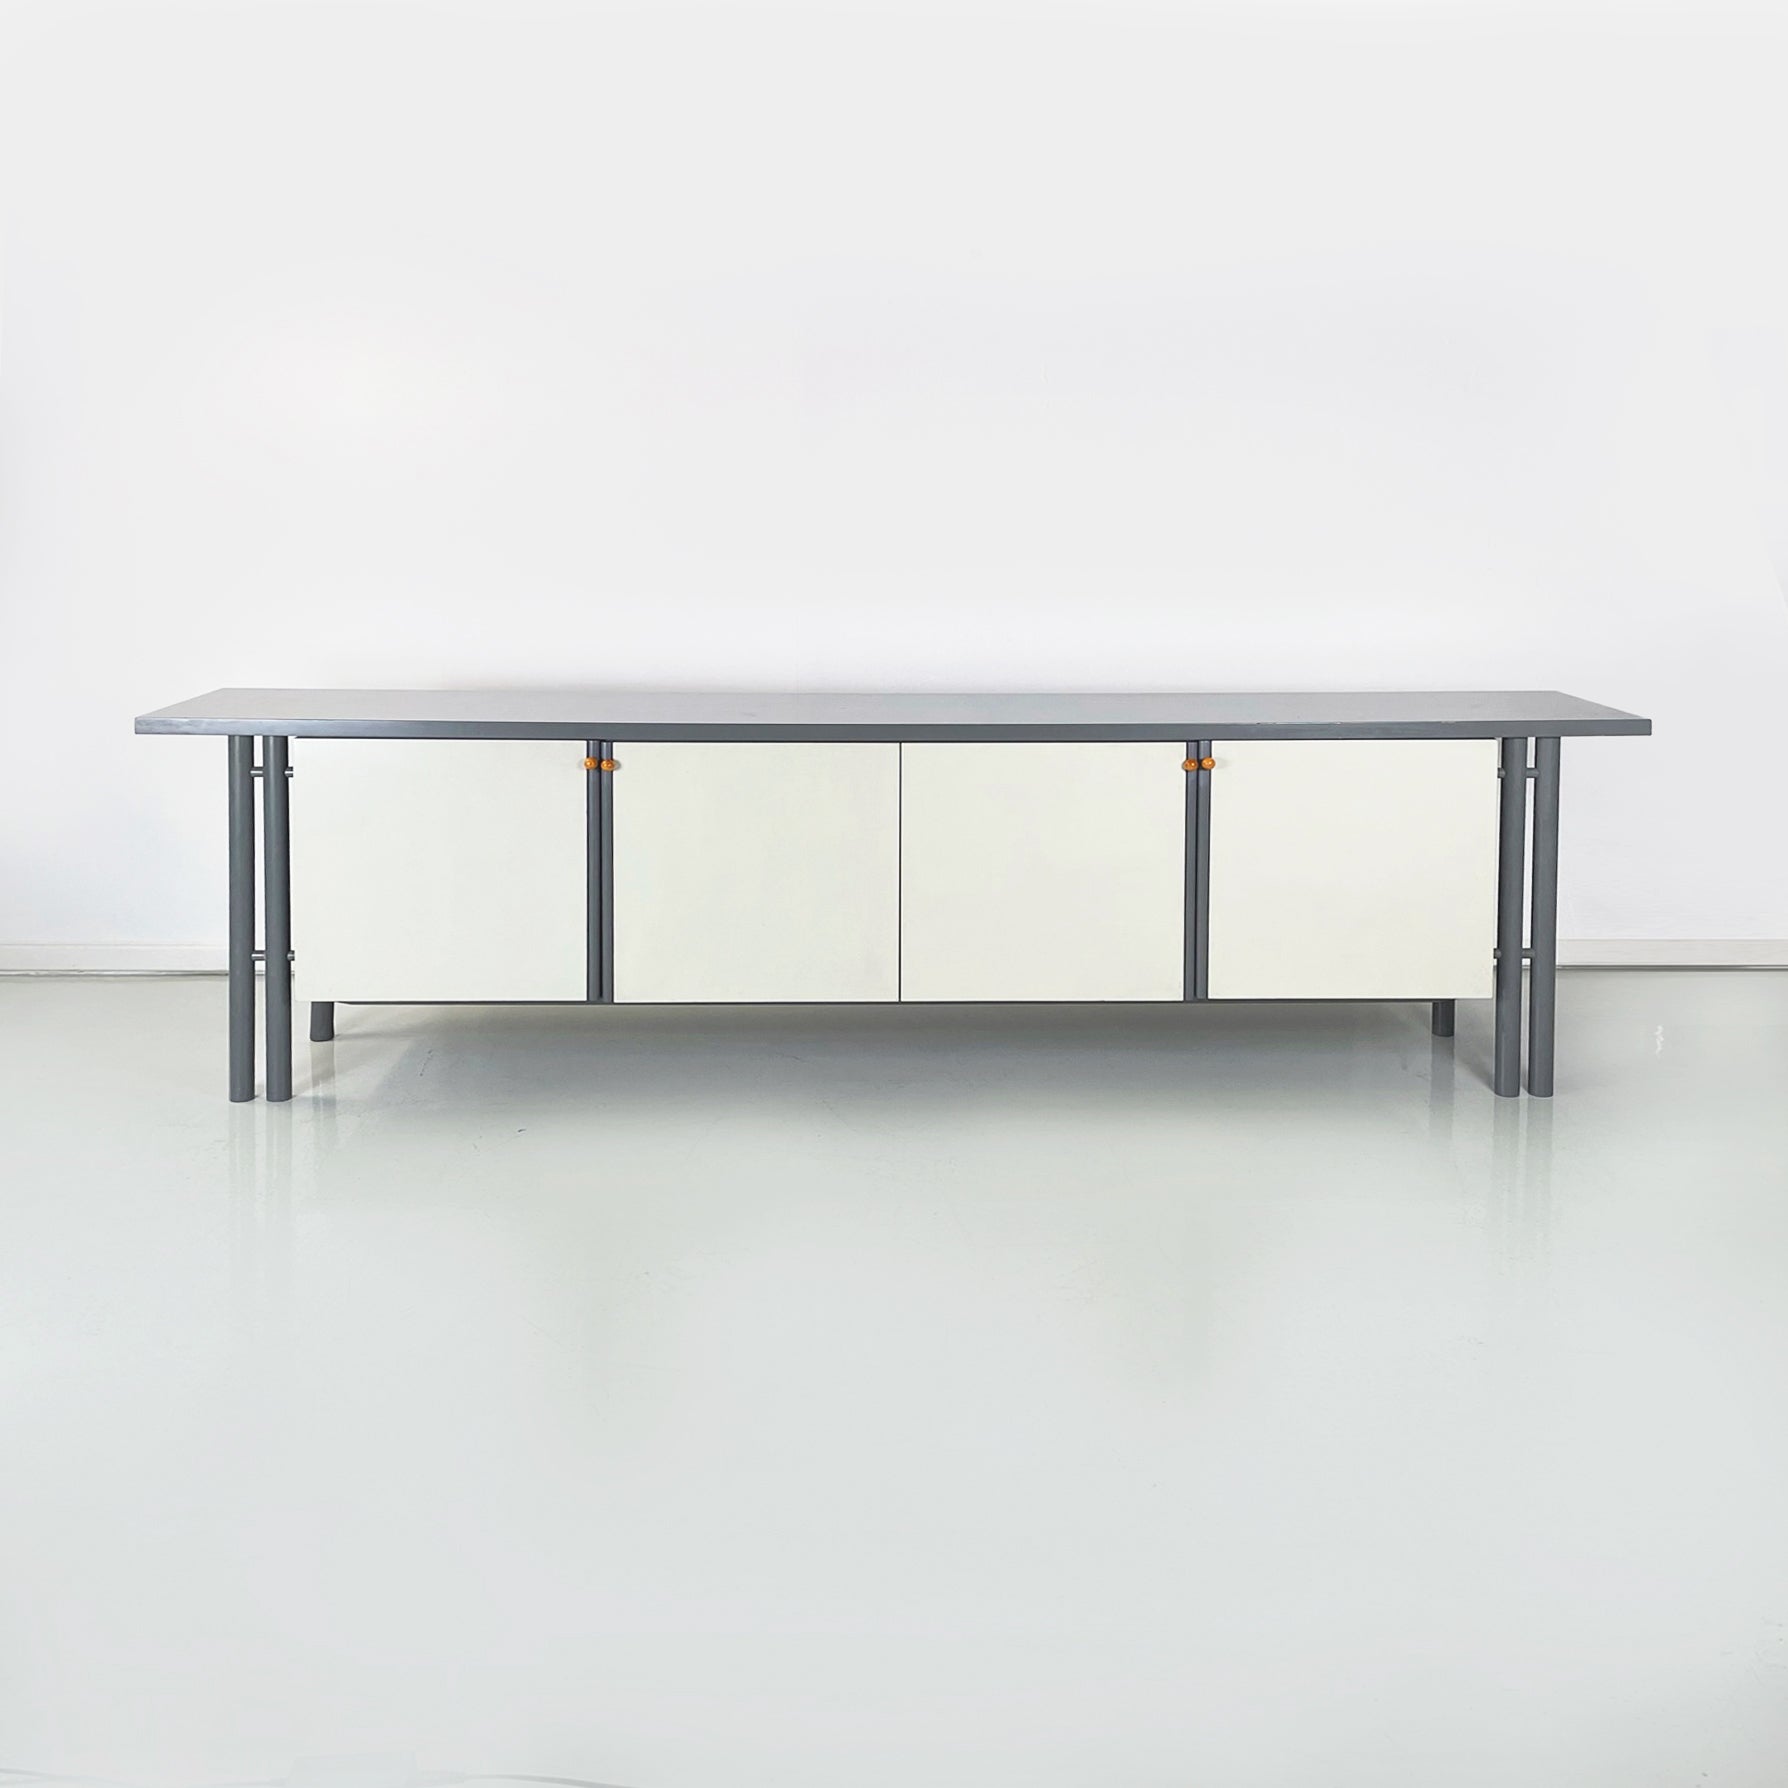 Italian Modern Rectangular Sideboard in Gray and White Wood, 1980s For Sale